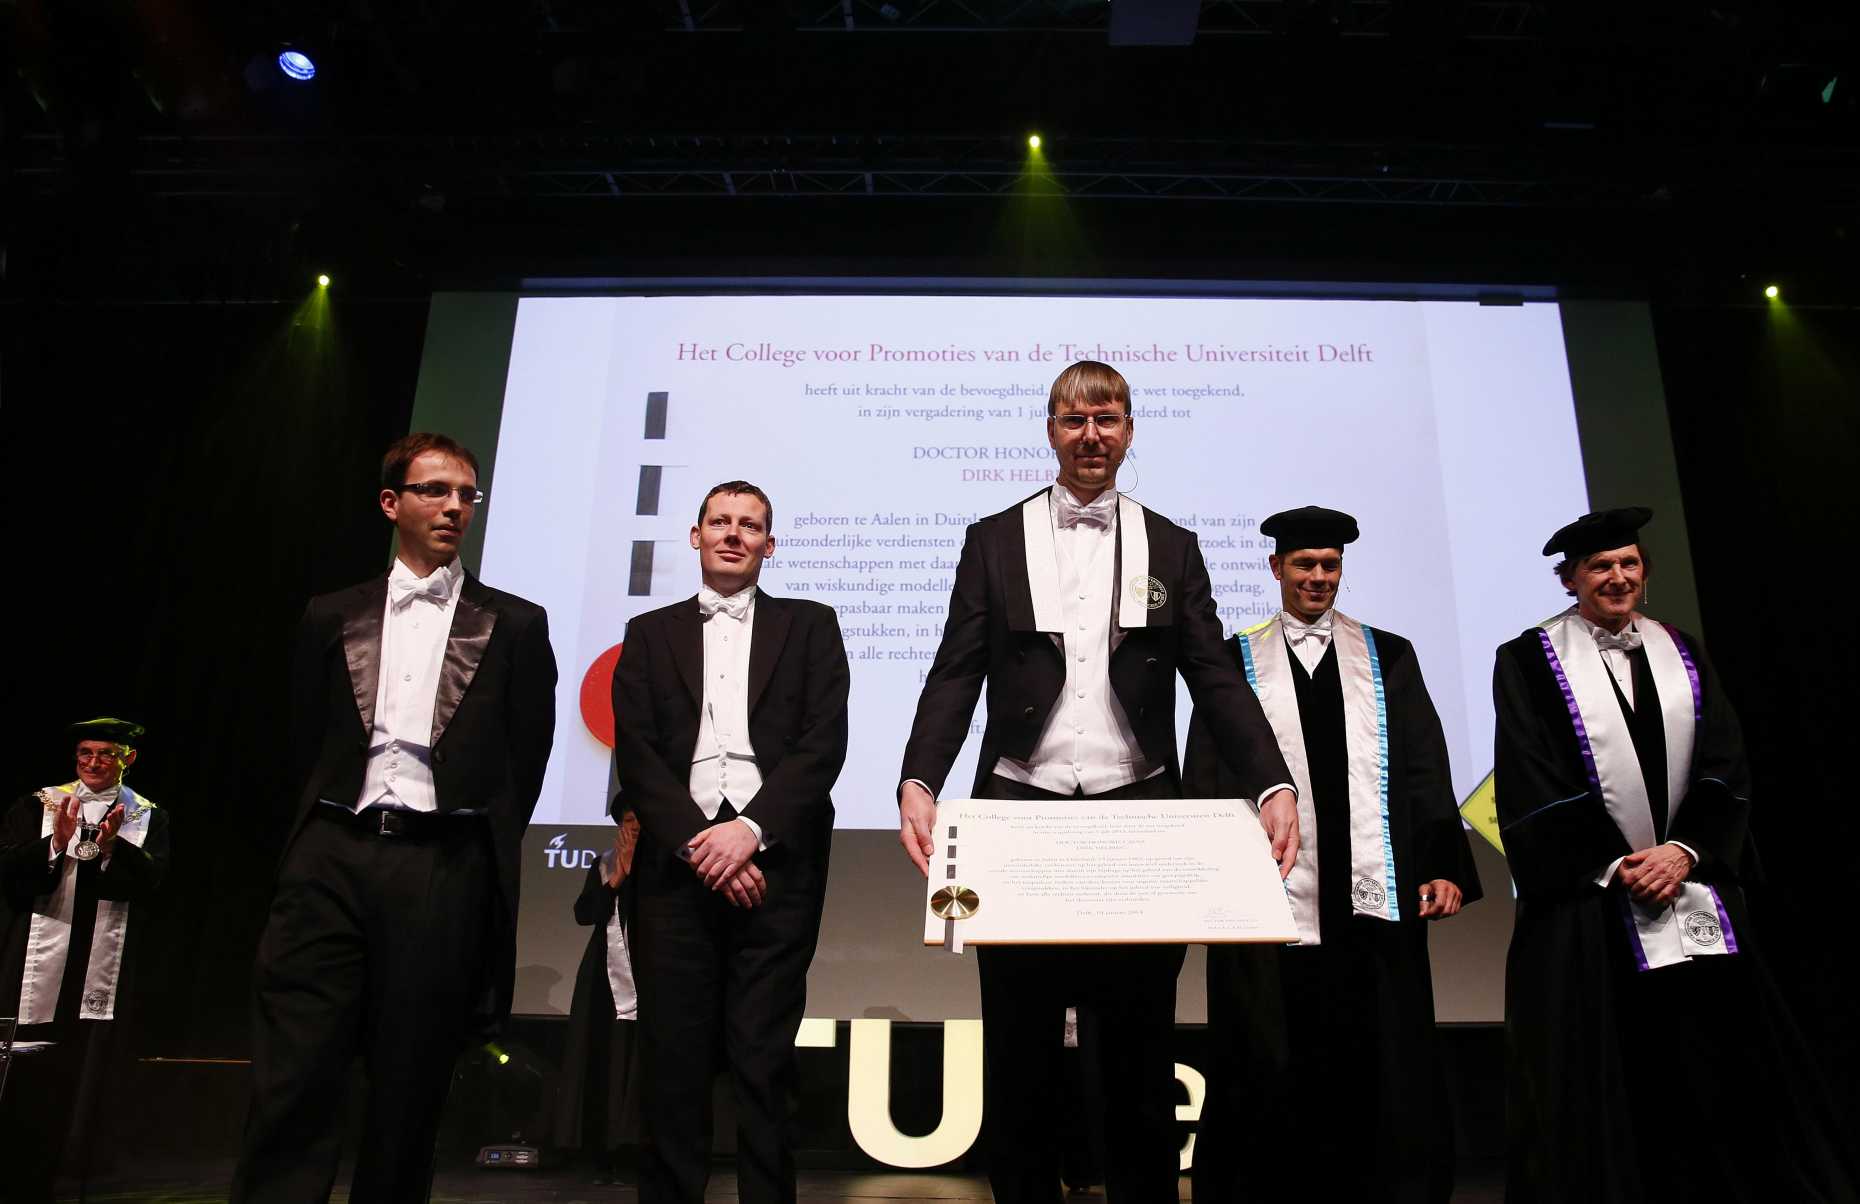 Enlarged view: Prof. Dirk Helbing recieving the honorary PhD from TU Delft